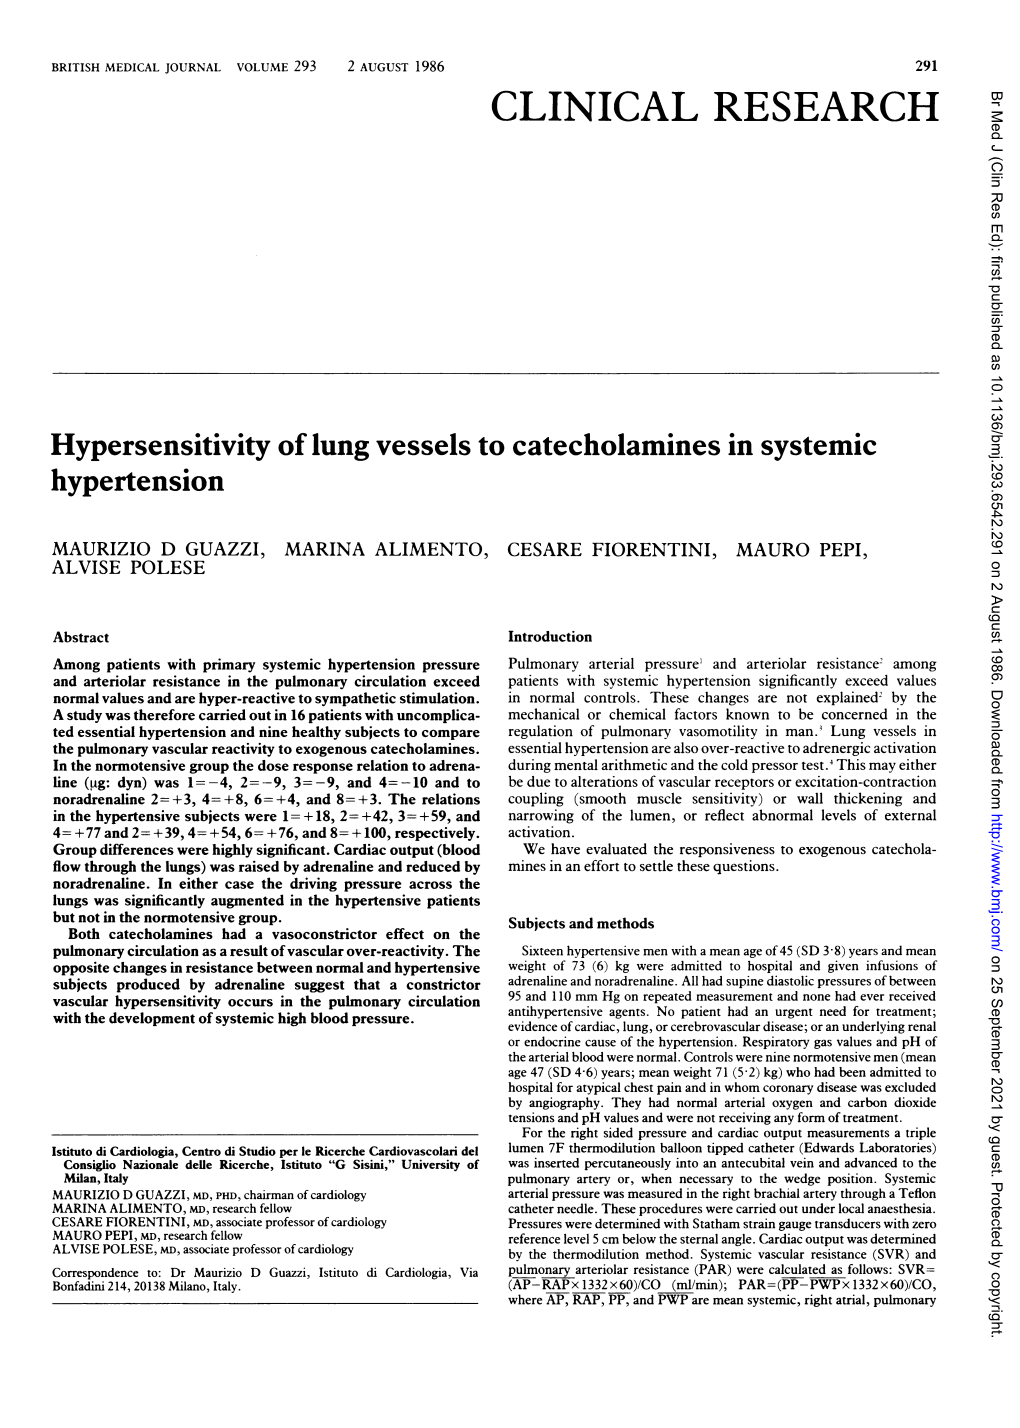 Hypersensitivity of Lung Vessels to Catecholamines in Systemic Hypertension